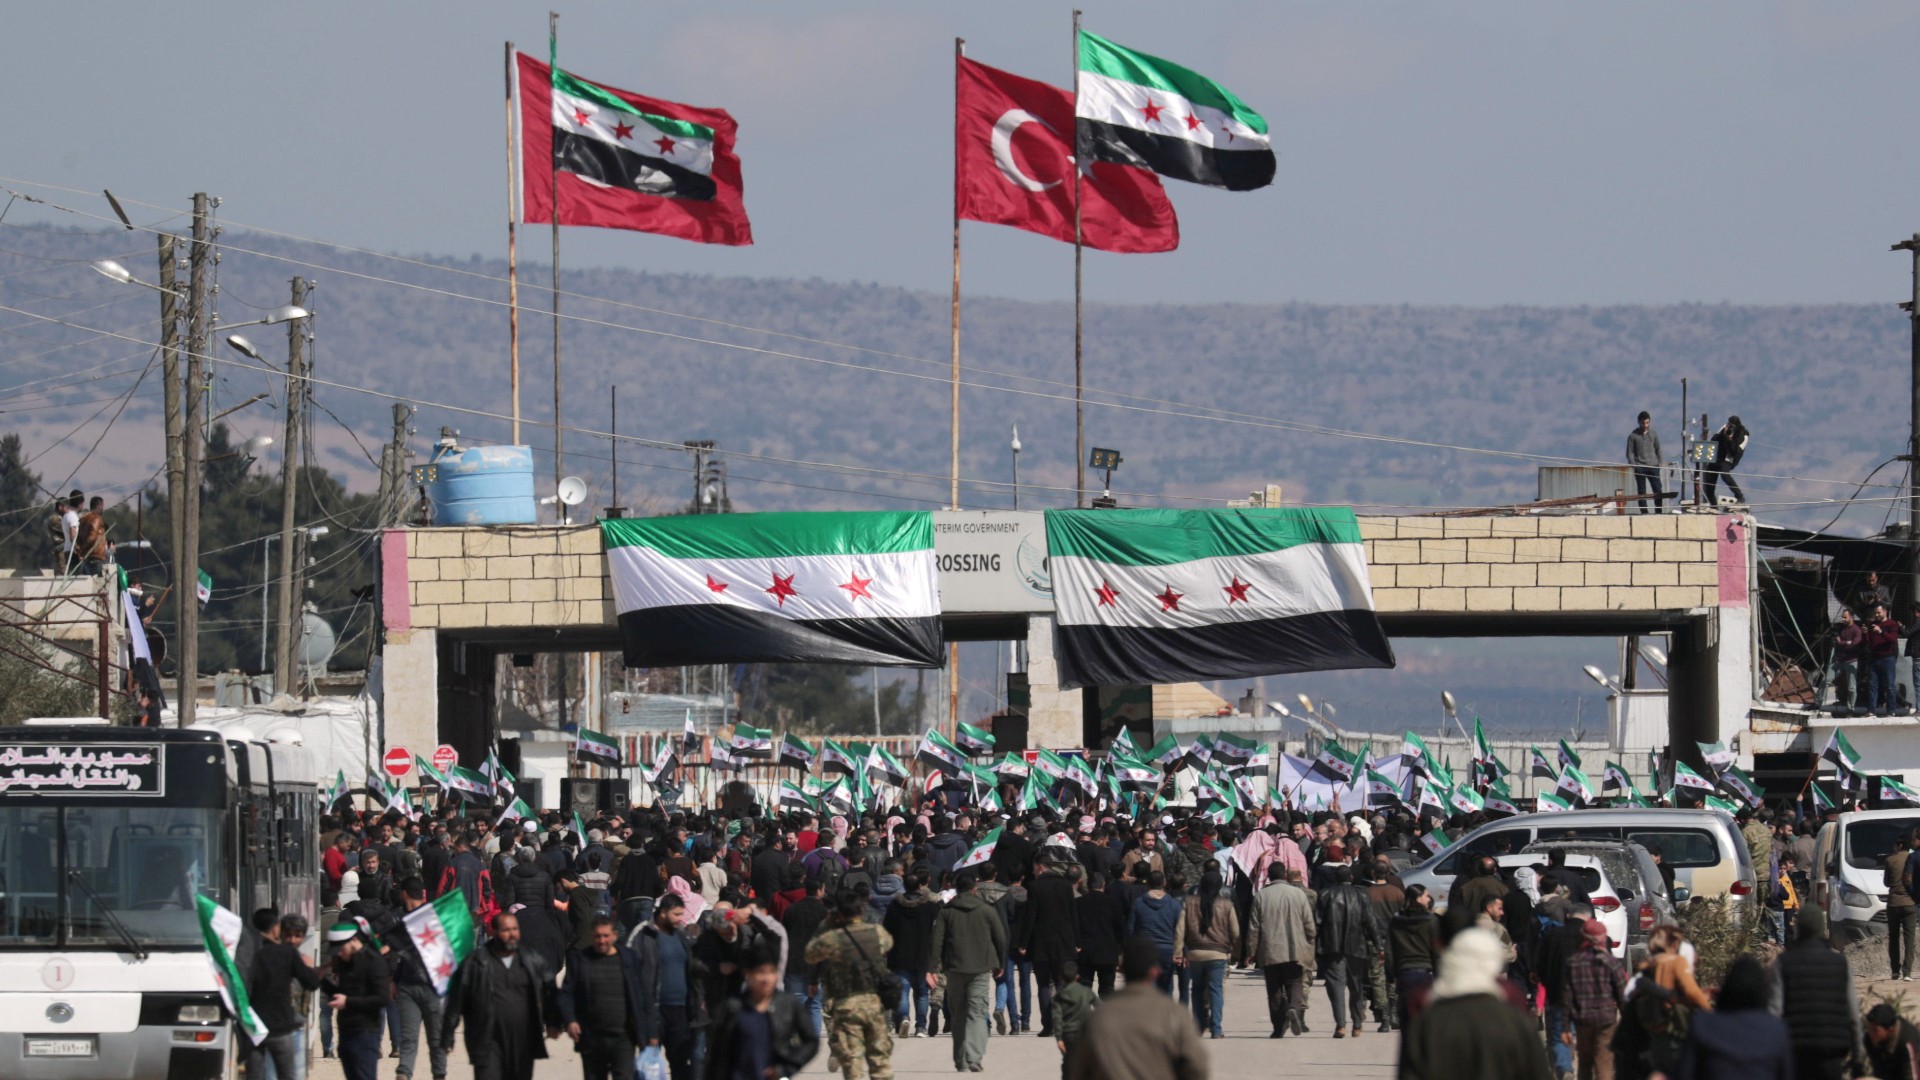 Internally displaced Syrians hold Syrian opposition flags during a protest in support of the Turkish army and Turkey backed Syrian rebels at the Bab el-Salam border crossing between the Syrian town of Azaz and the Turkish town of Kilis, in Syria, February 25, 2020.